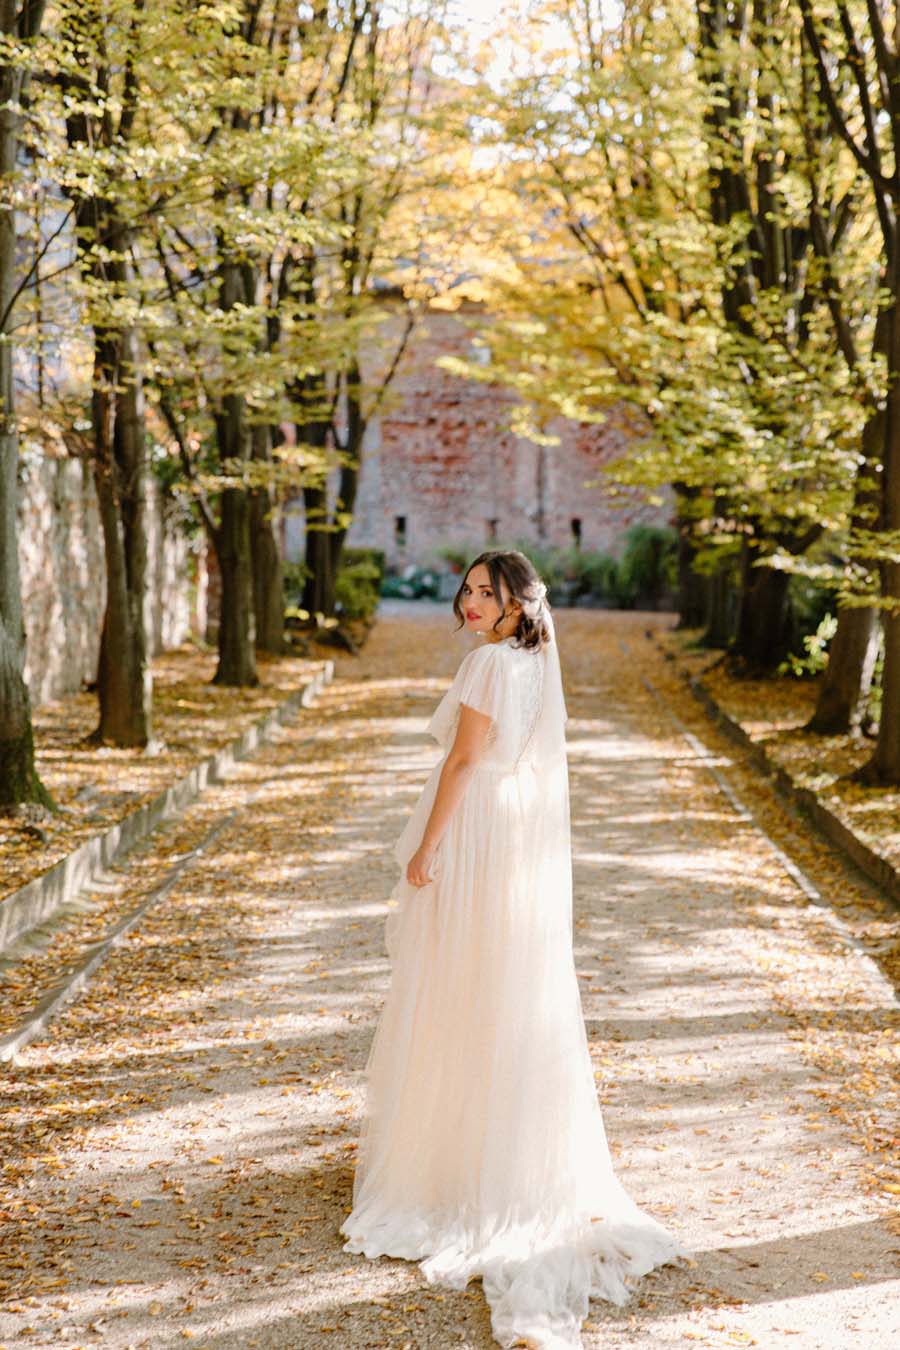 Old Vintage Yet Modern Wedding Inspiration: Fall In Love